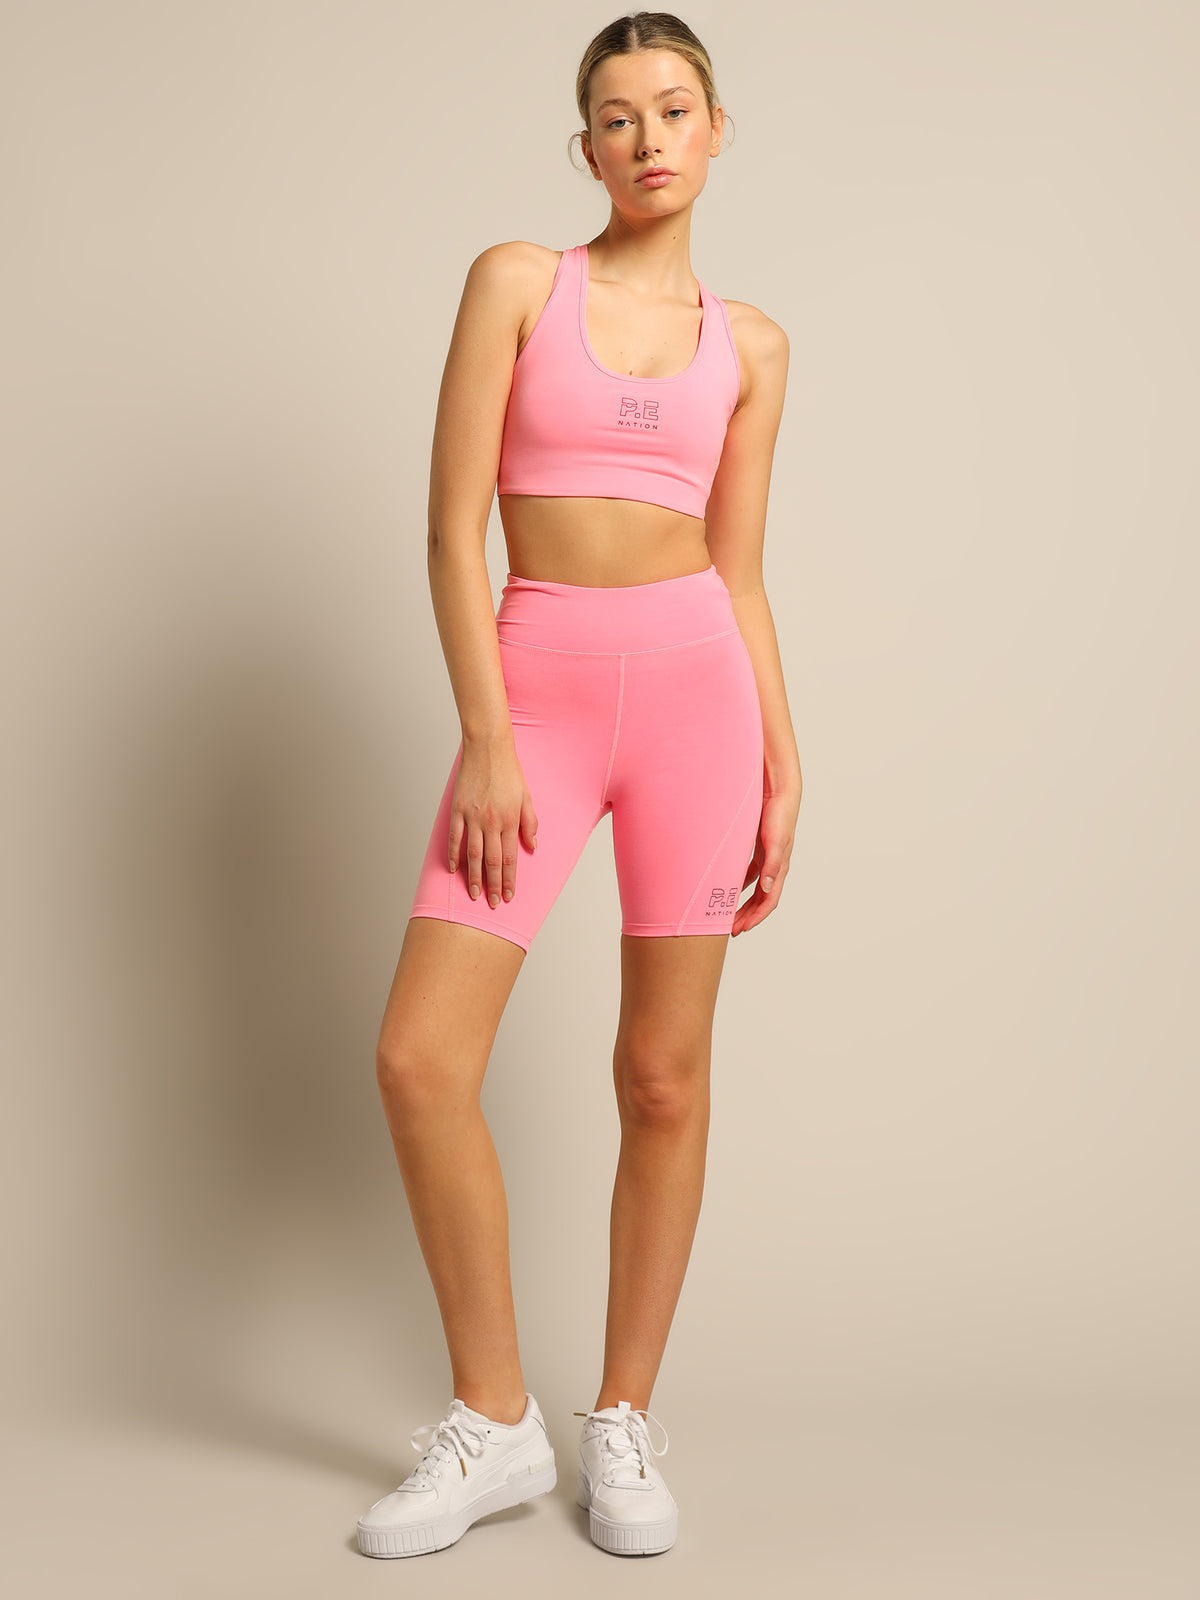 Half Time Sports Bra in Knockout Pink